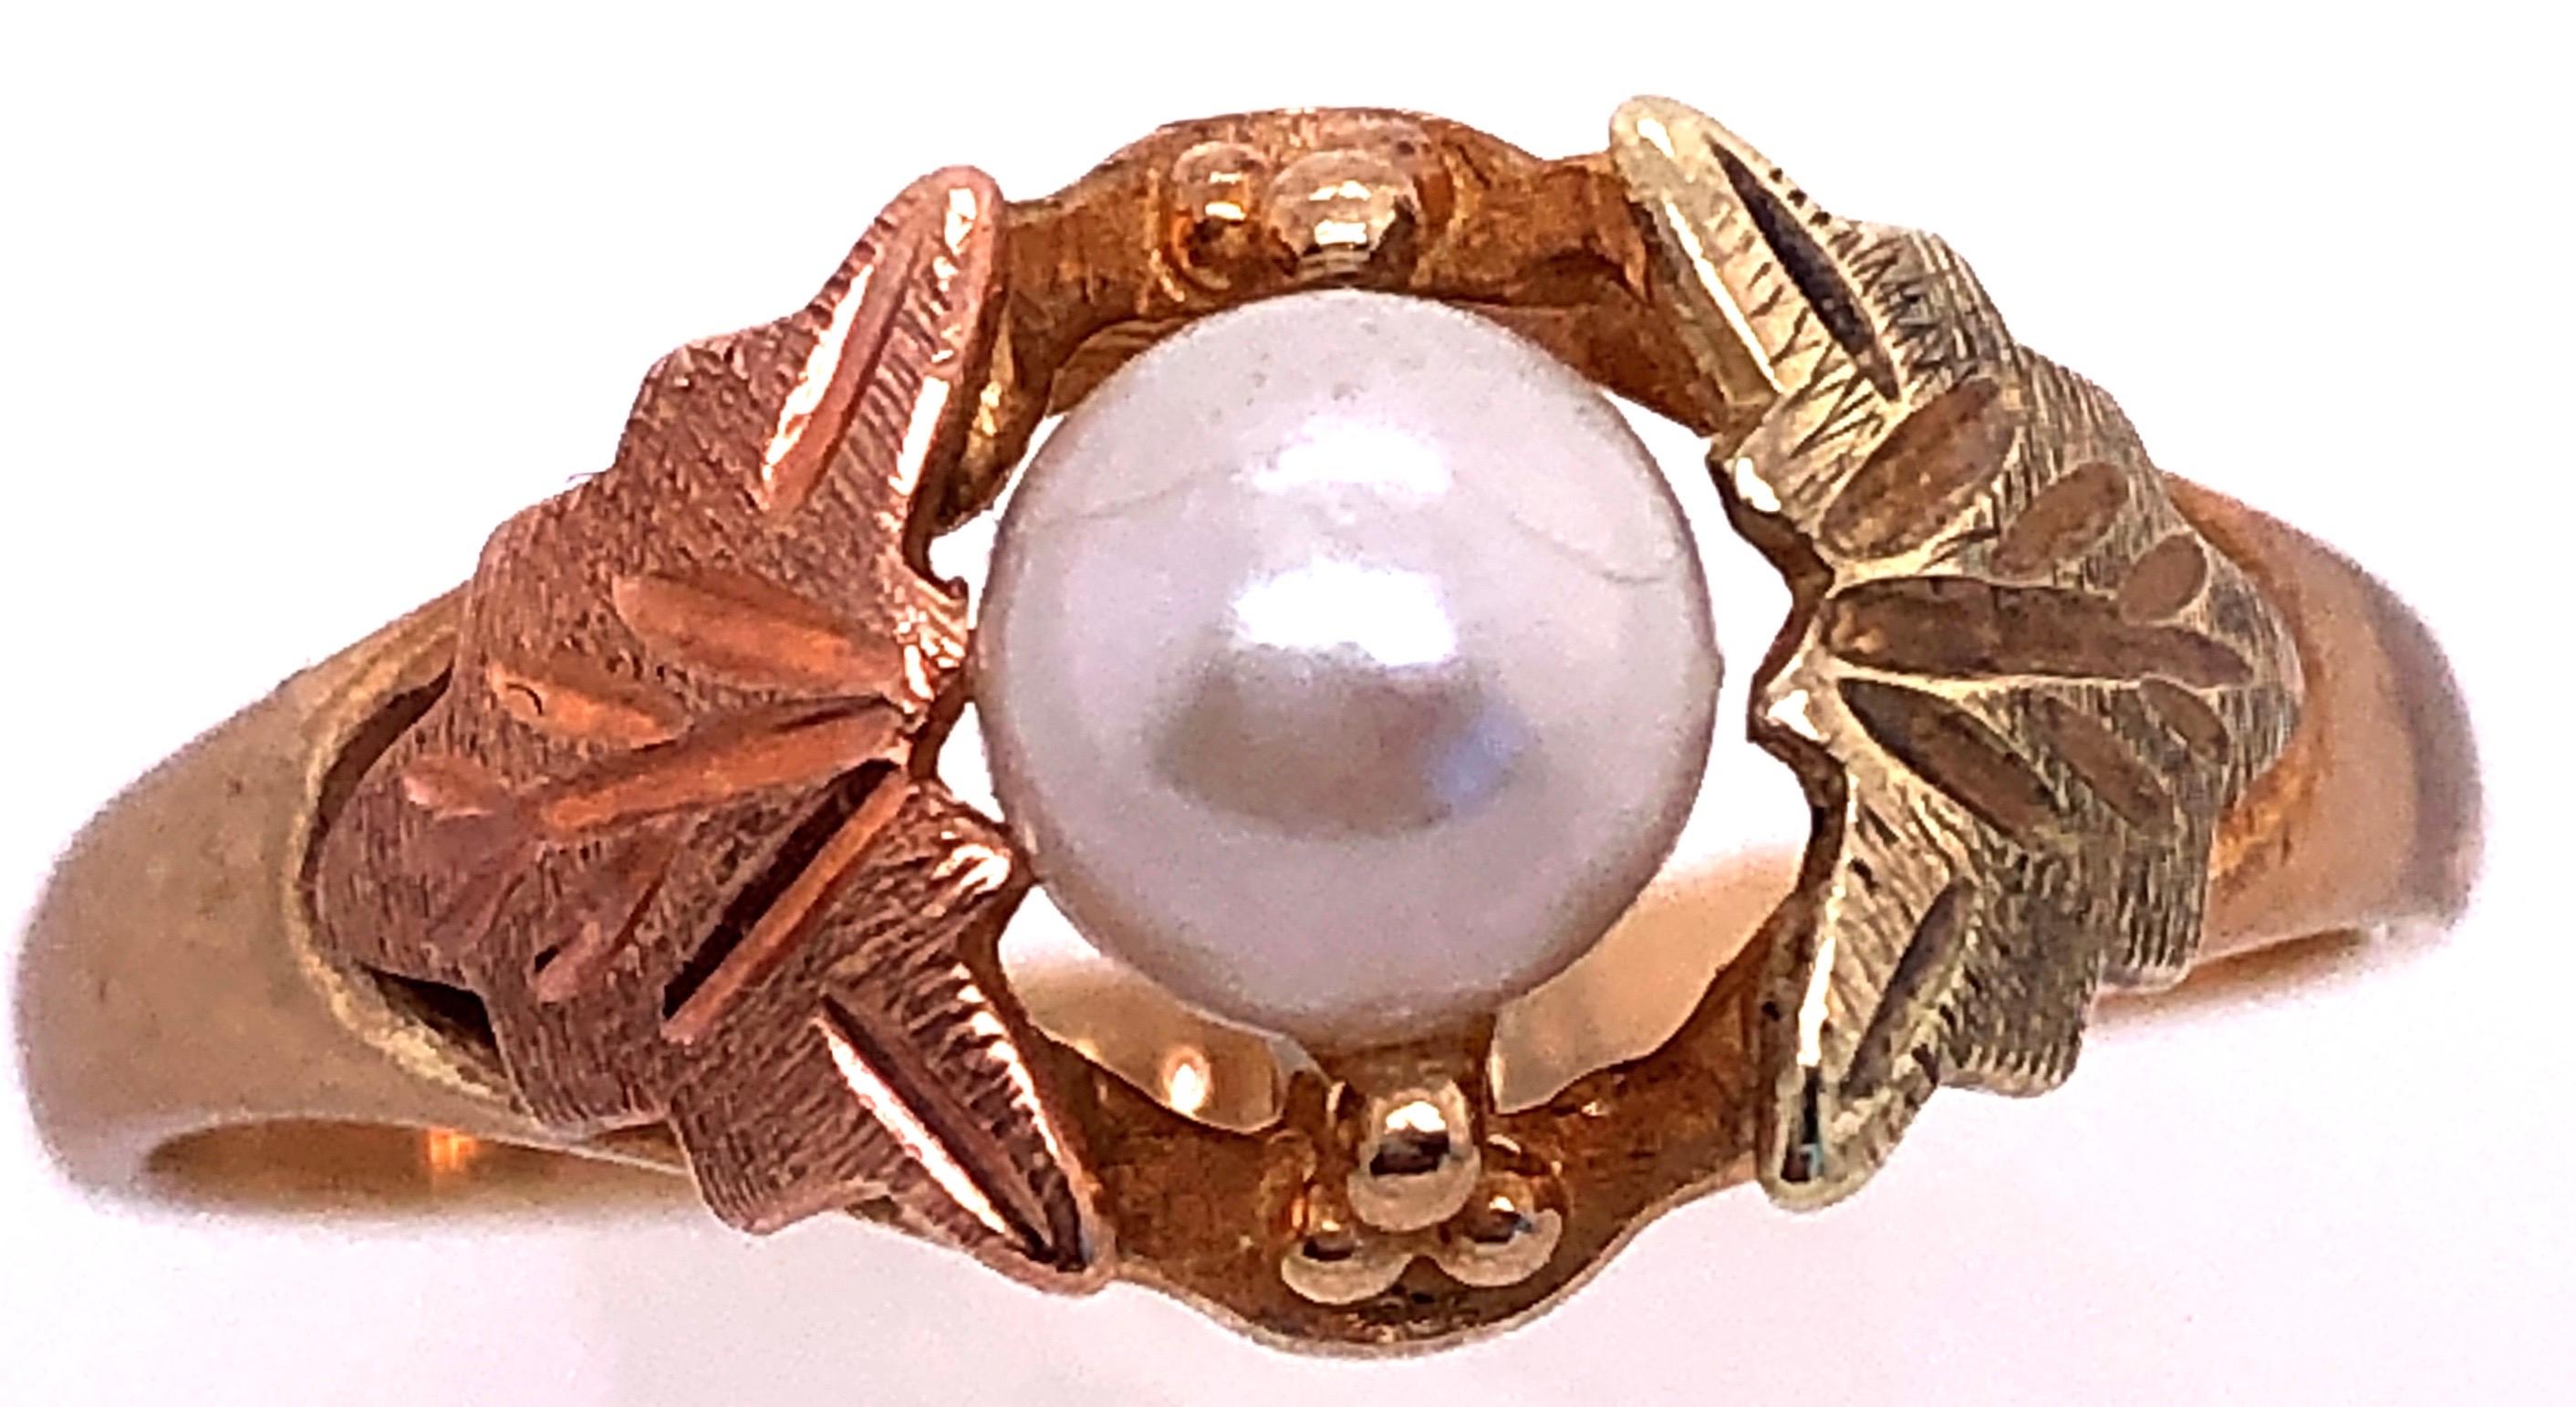 10 Karat Yellow and Rose Gold Fashion Pearl Ring Size 7.75.
5 mm diameter pearl.
1.4 grams total weight.
